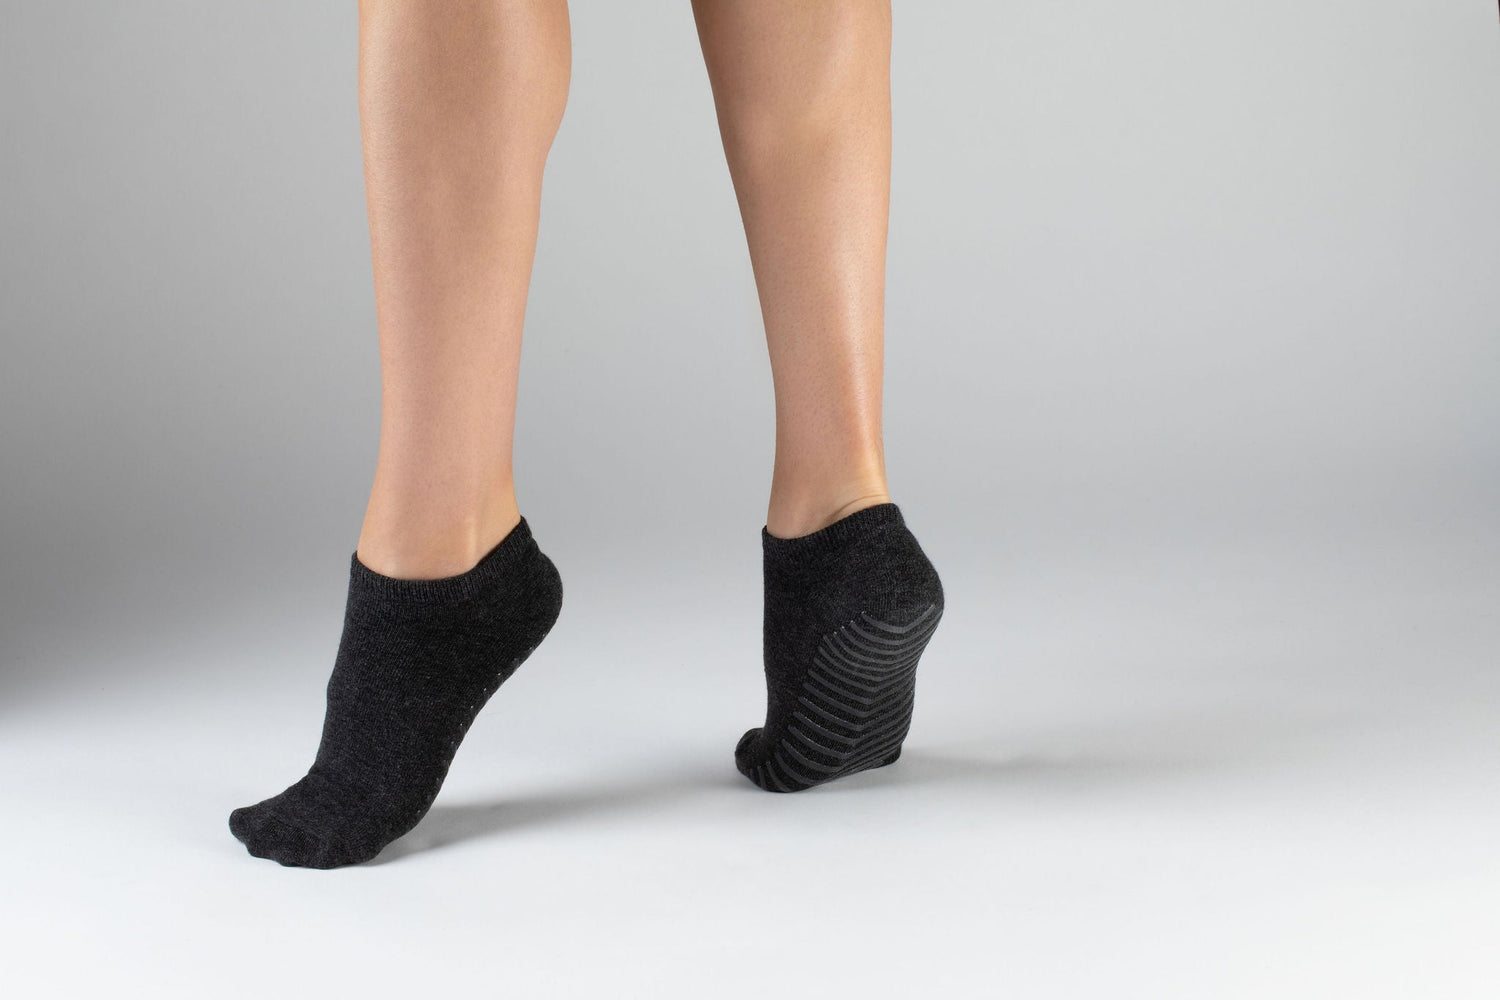 Model wearing black anti slip ankle socks made of ultra soft cotton with sticky grips.